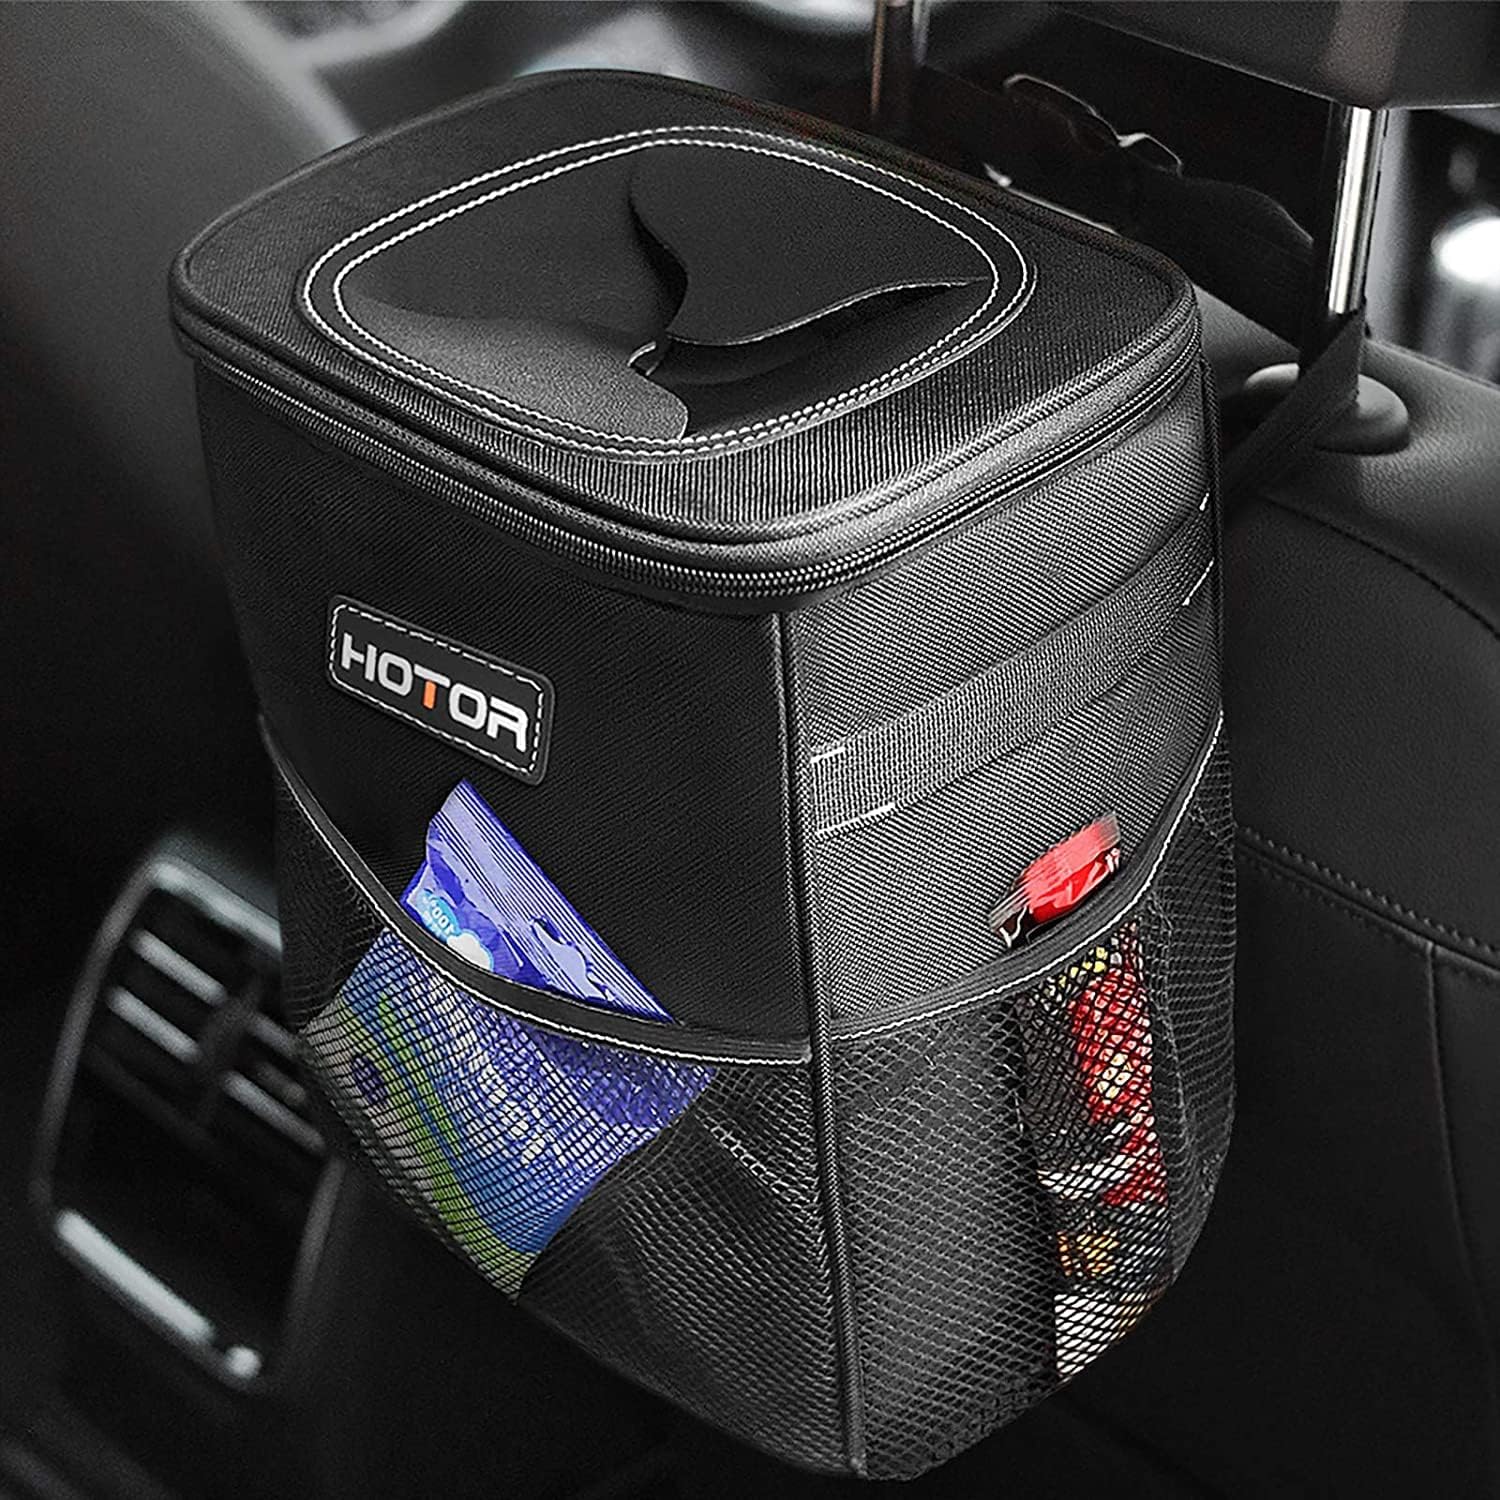 2-Gallon Hotor Leak-Proof Multipurpose Car Trash Can w/ Adjustable Straps & Pockets (Black) $5 + Free Shipping w/ Prime or on Orders $35+